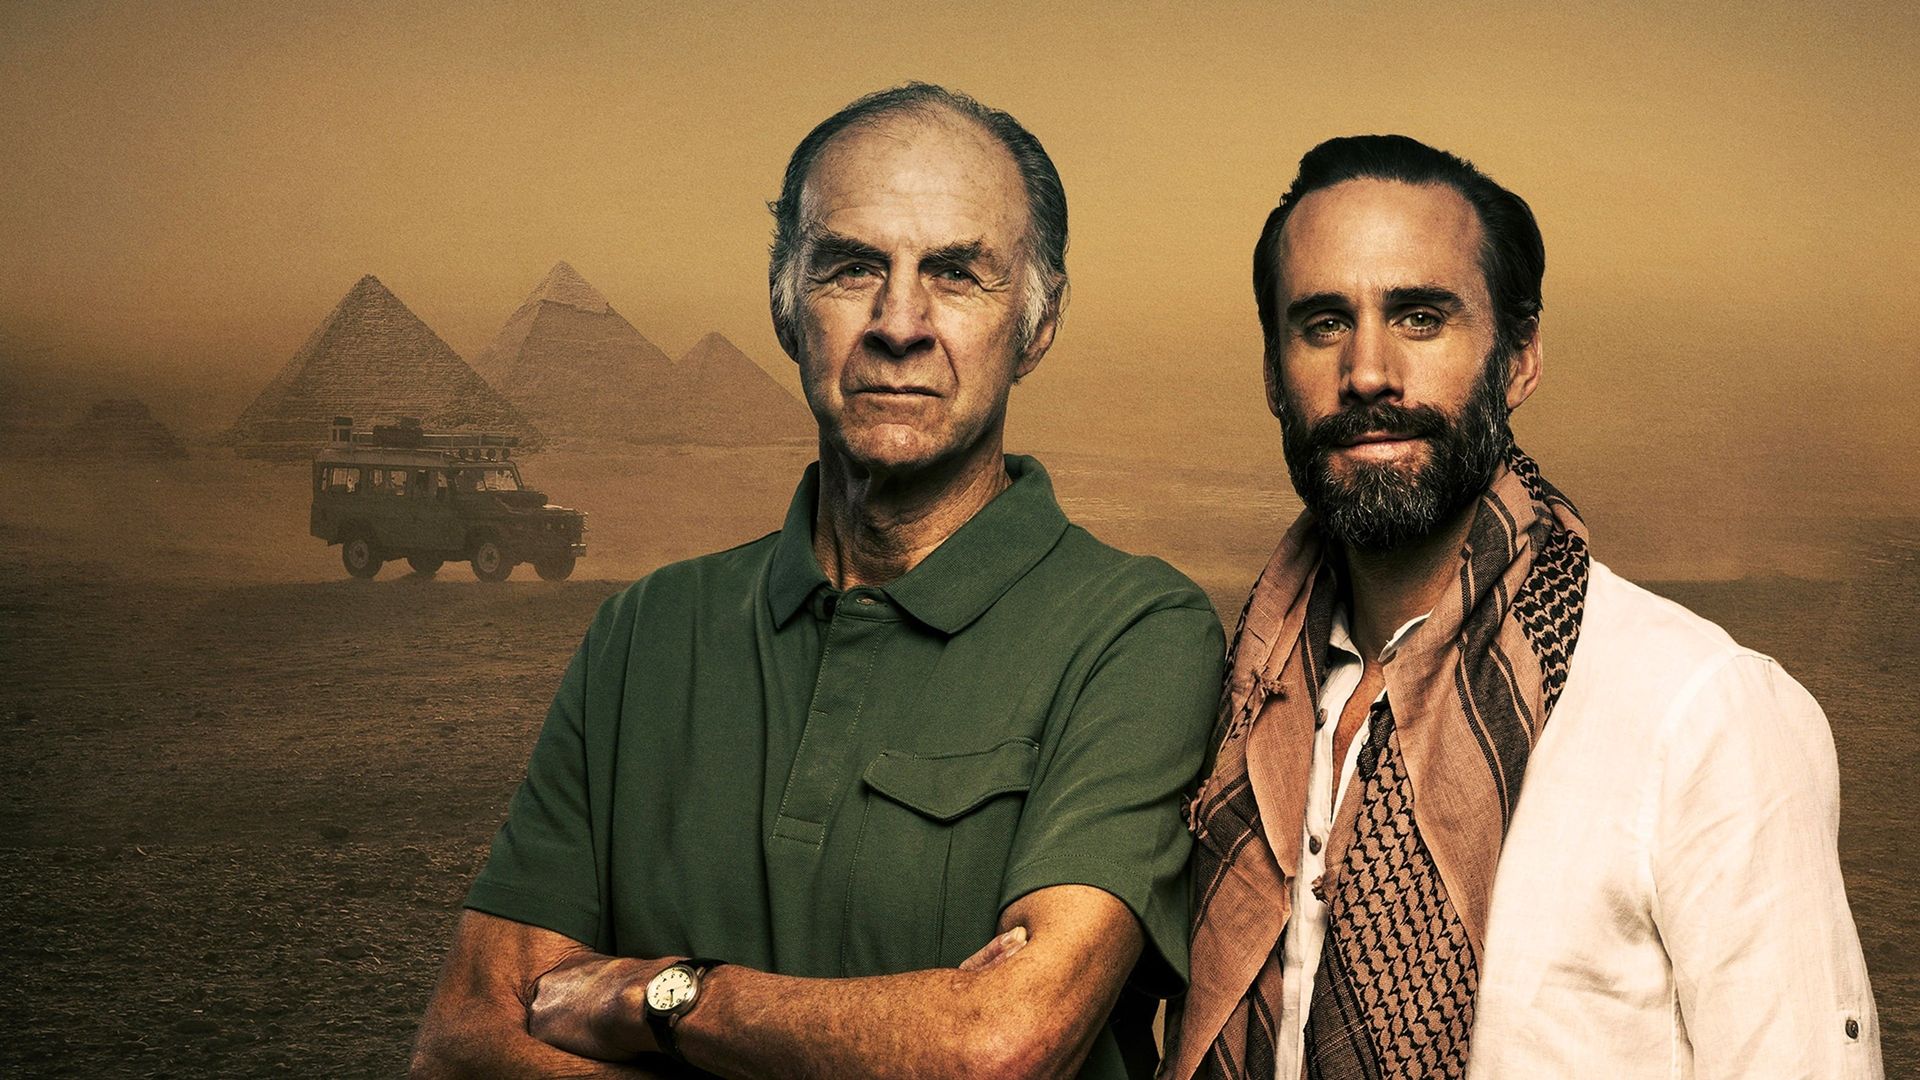 Fiennes: Return to the Nile background